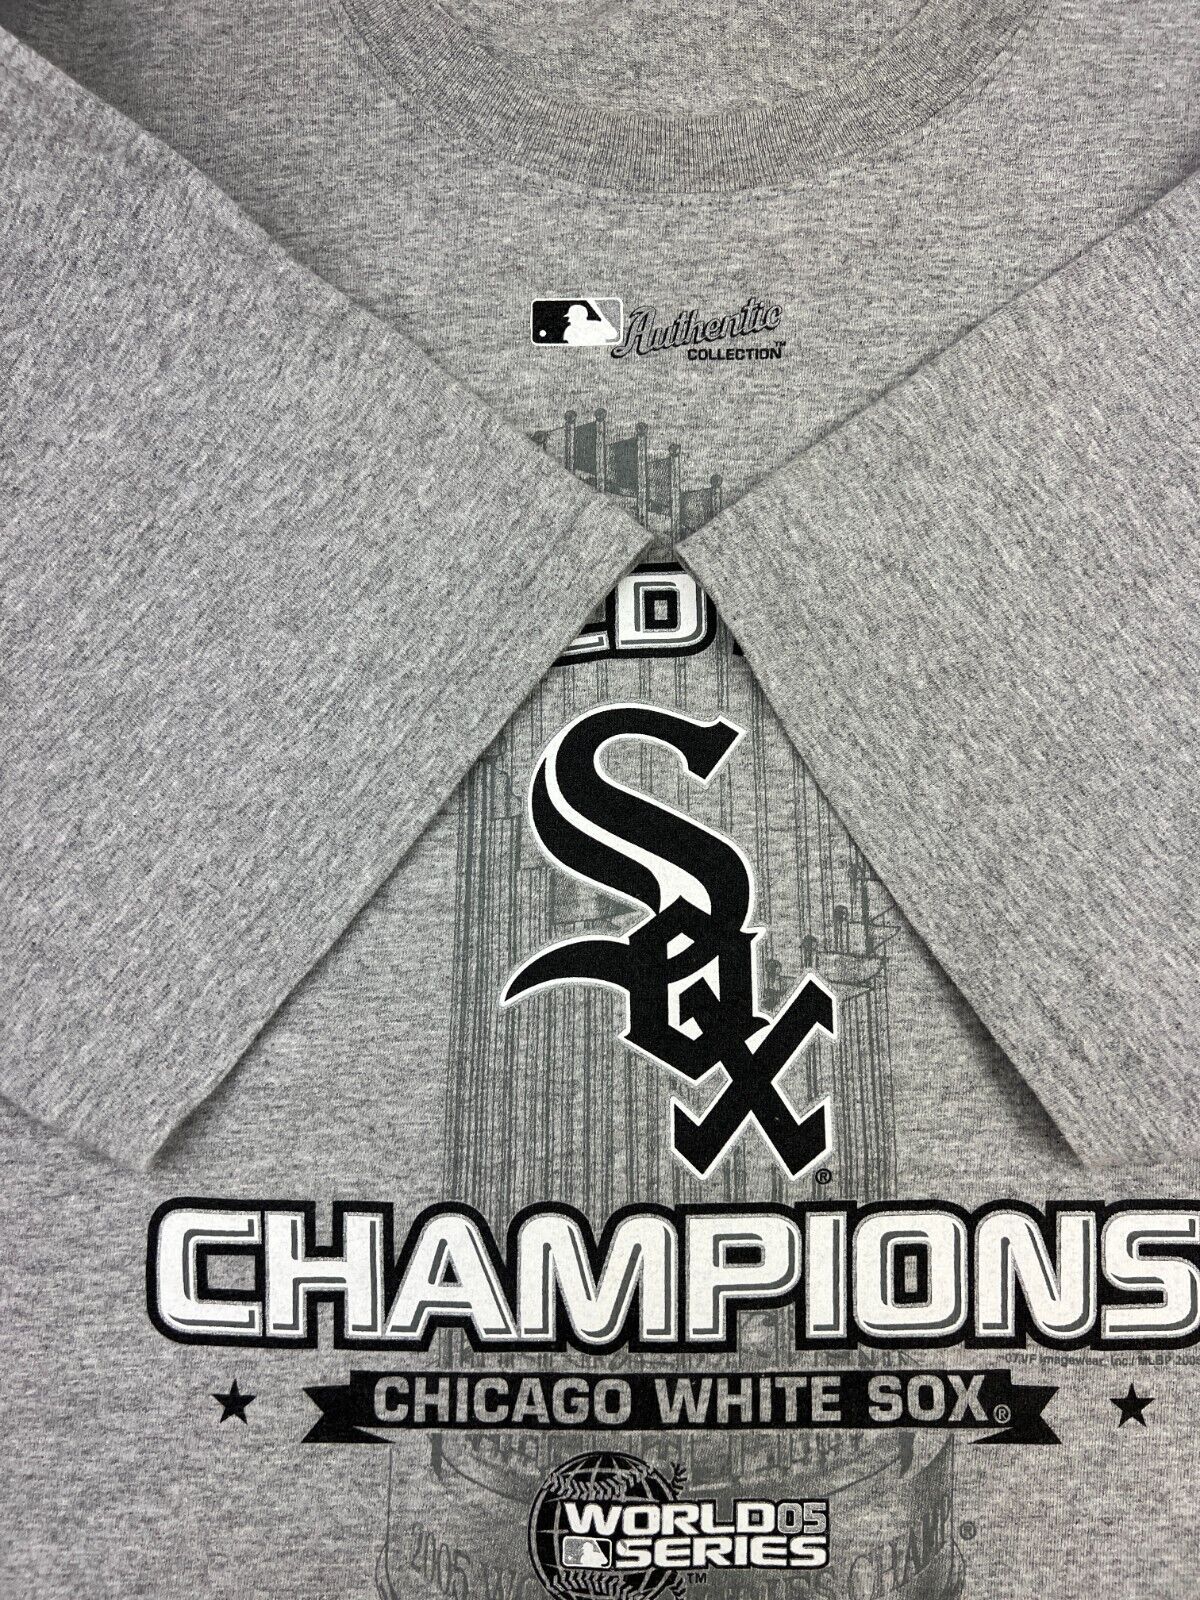 Vintage 2005 Chicago White Sox MLB World Series Champs Graphic T-Shirt Sz Large